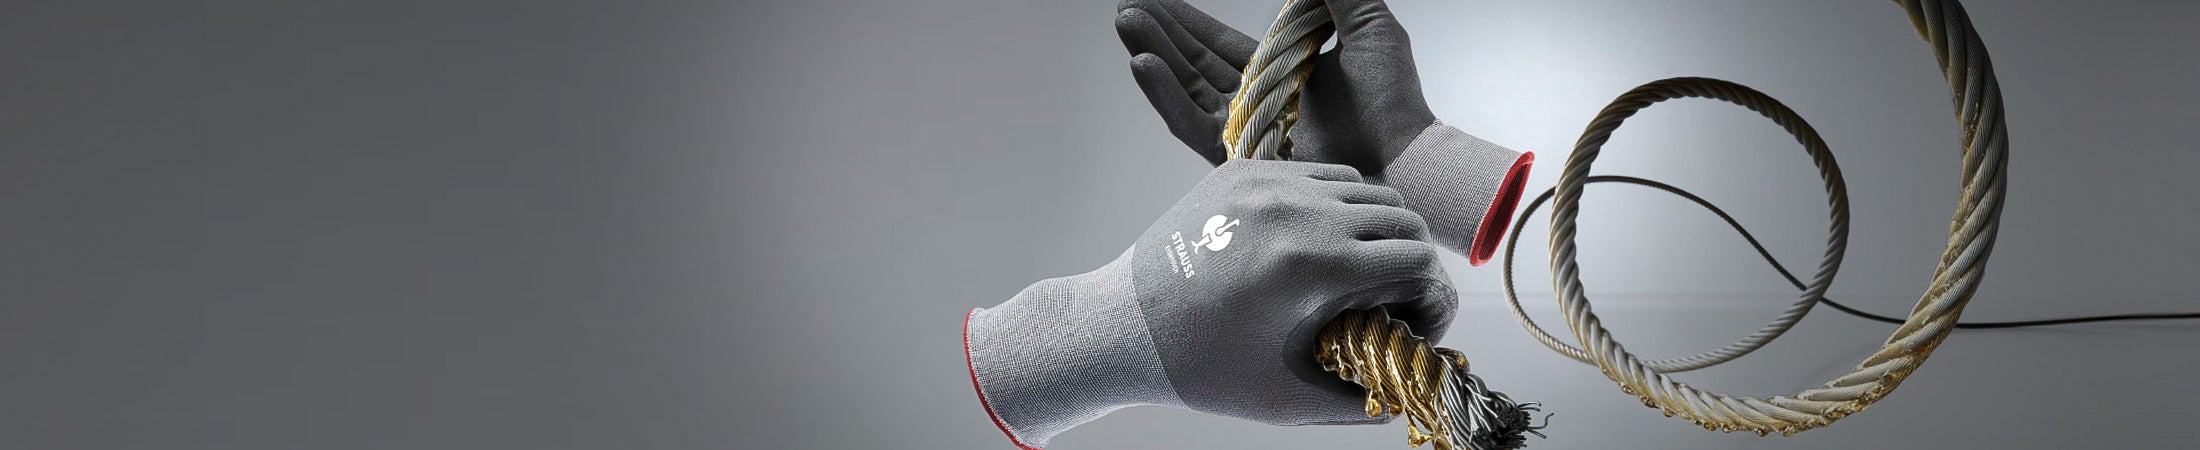 COATED GLOVES from Strauss